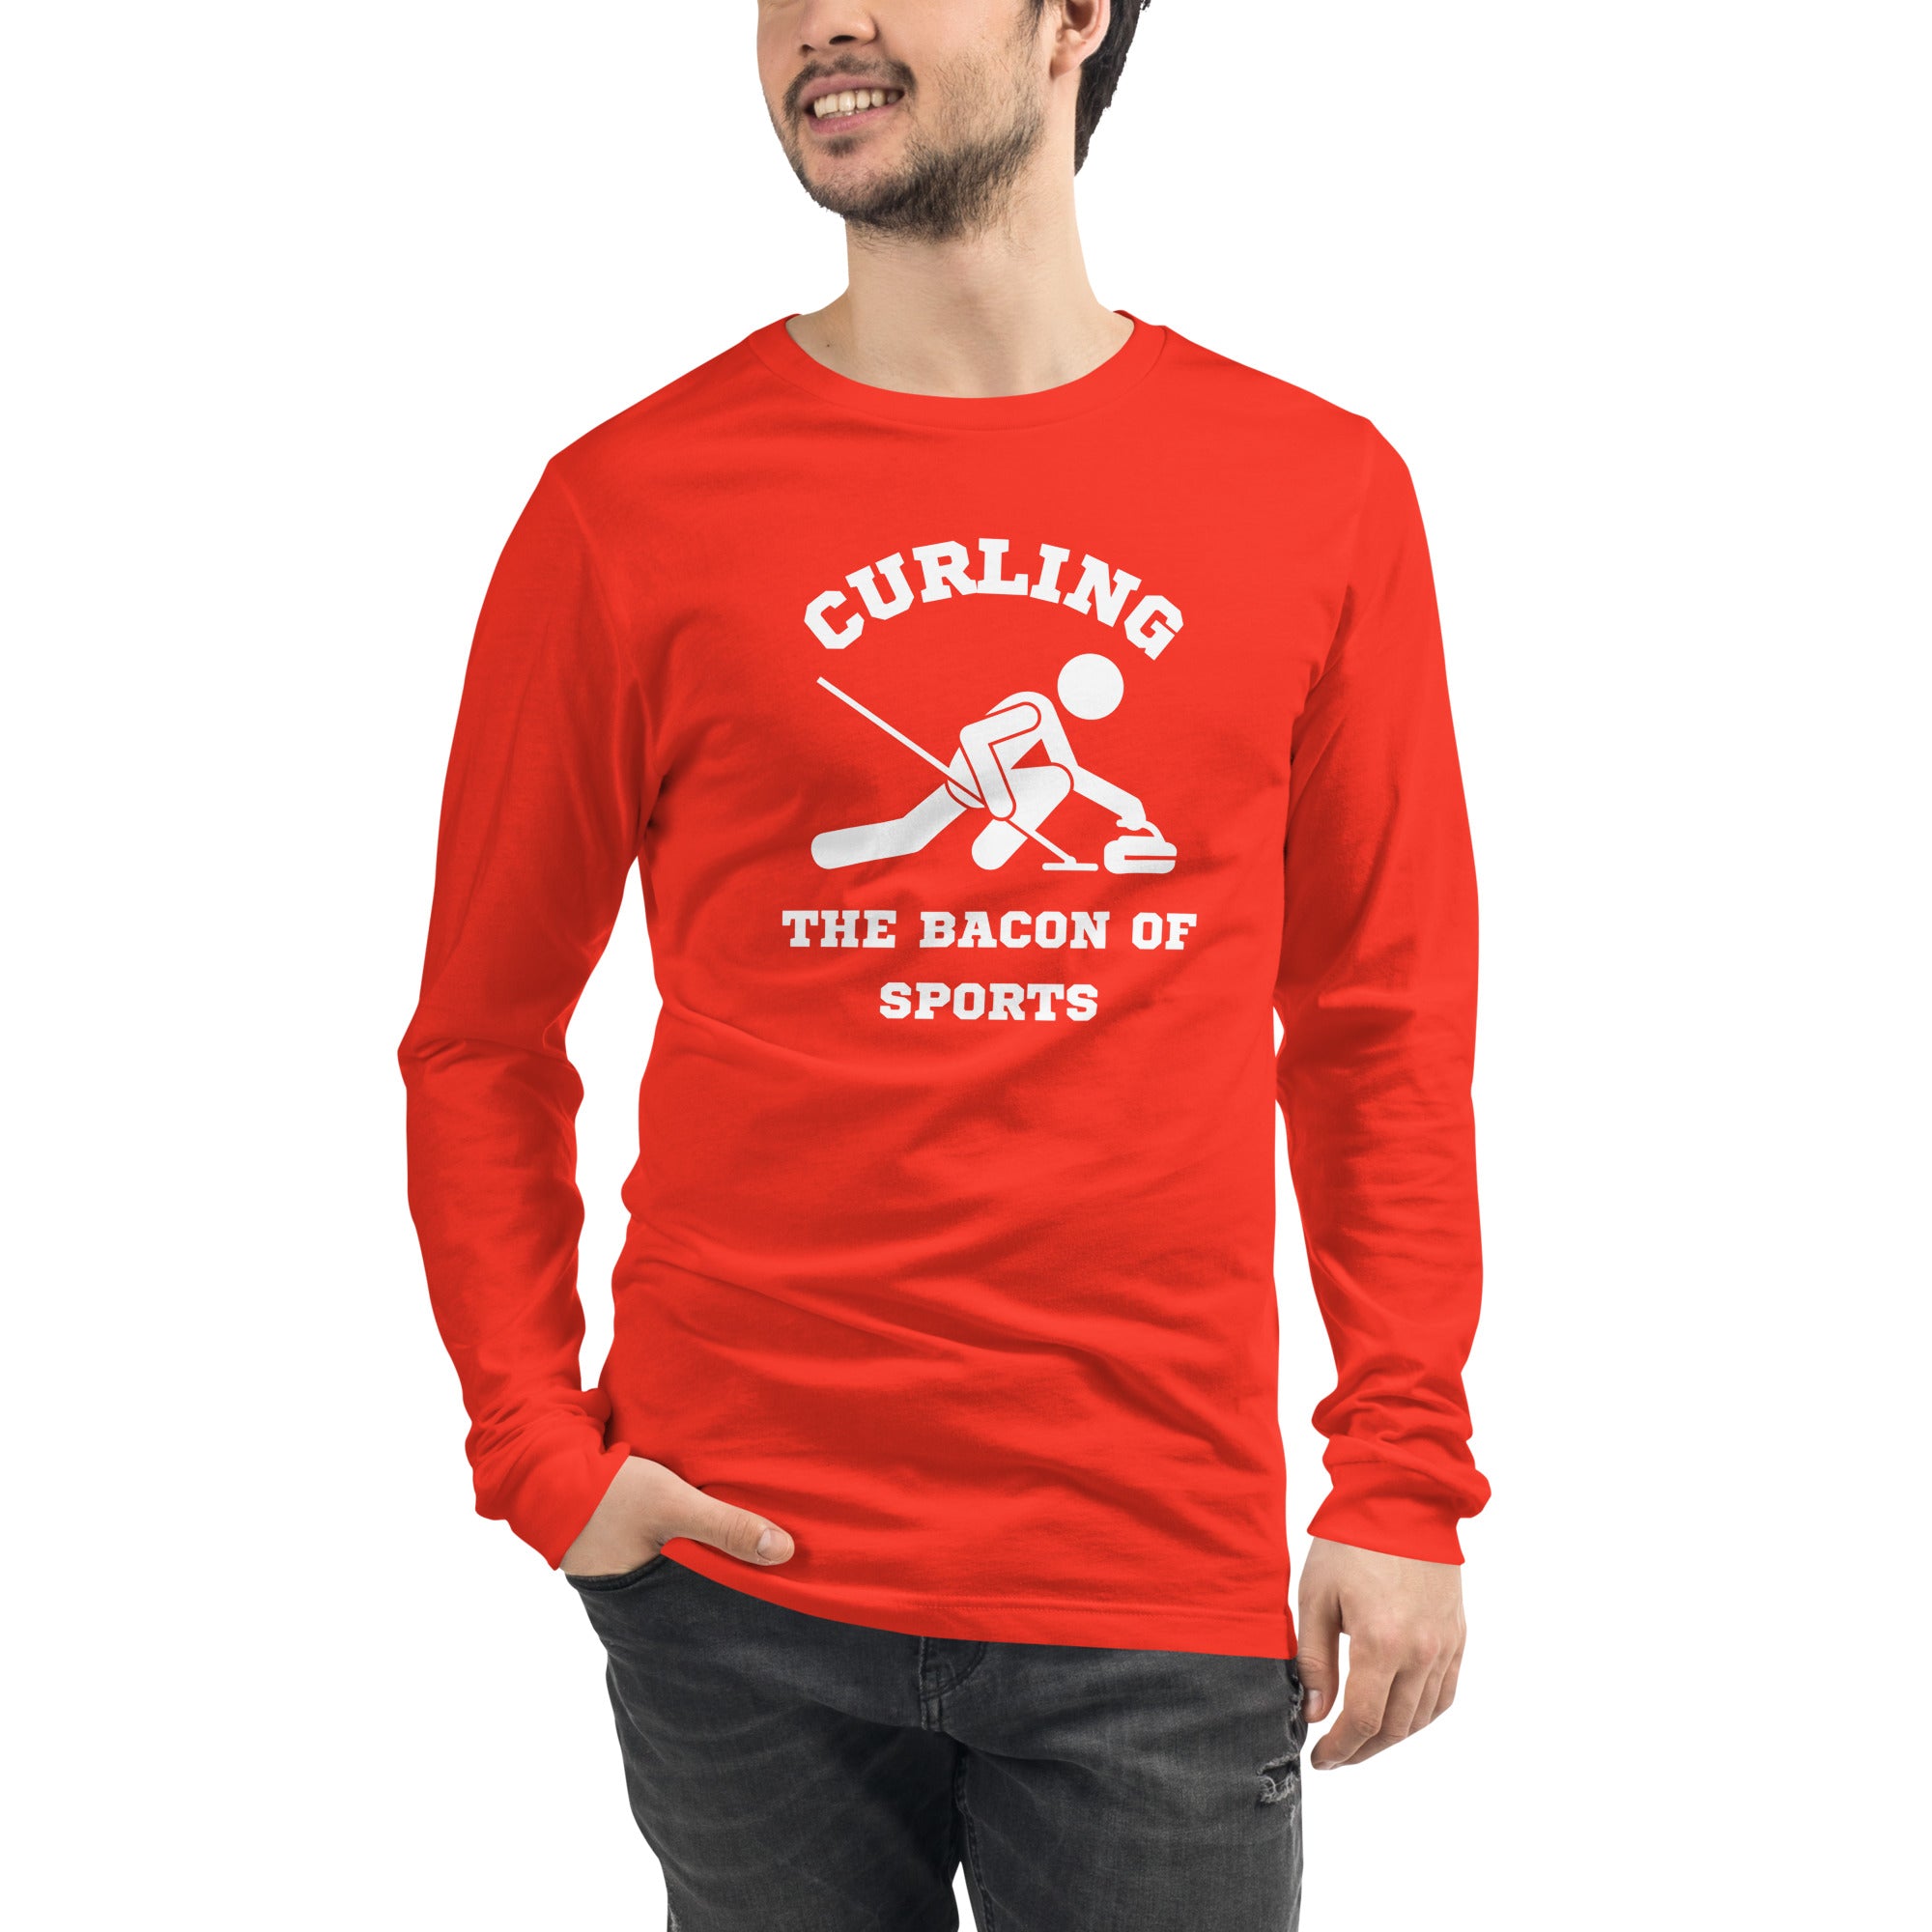 Curling The Bacon Of Sports Men's Select Long Sleeve